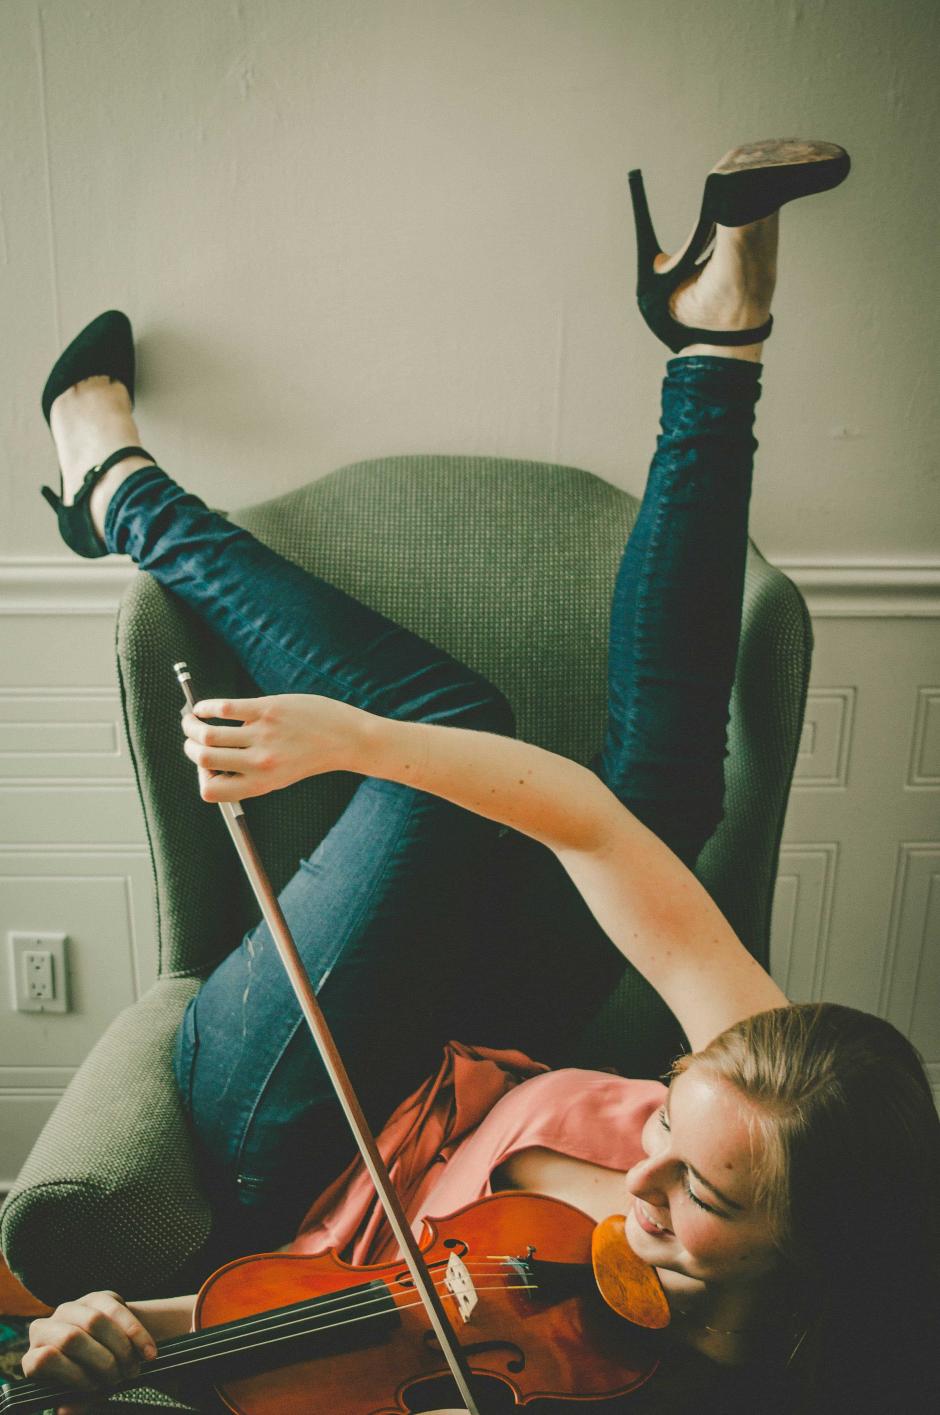 Lauren lays on a chair and plays a violin. She is wearing jeans and smiles.